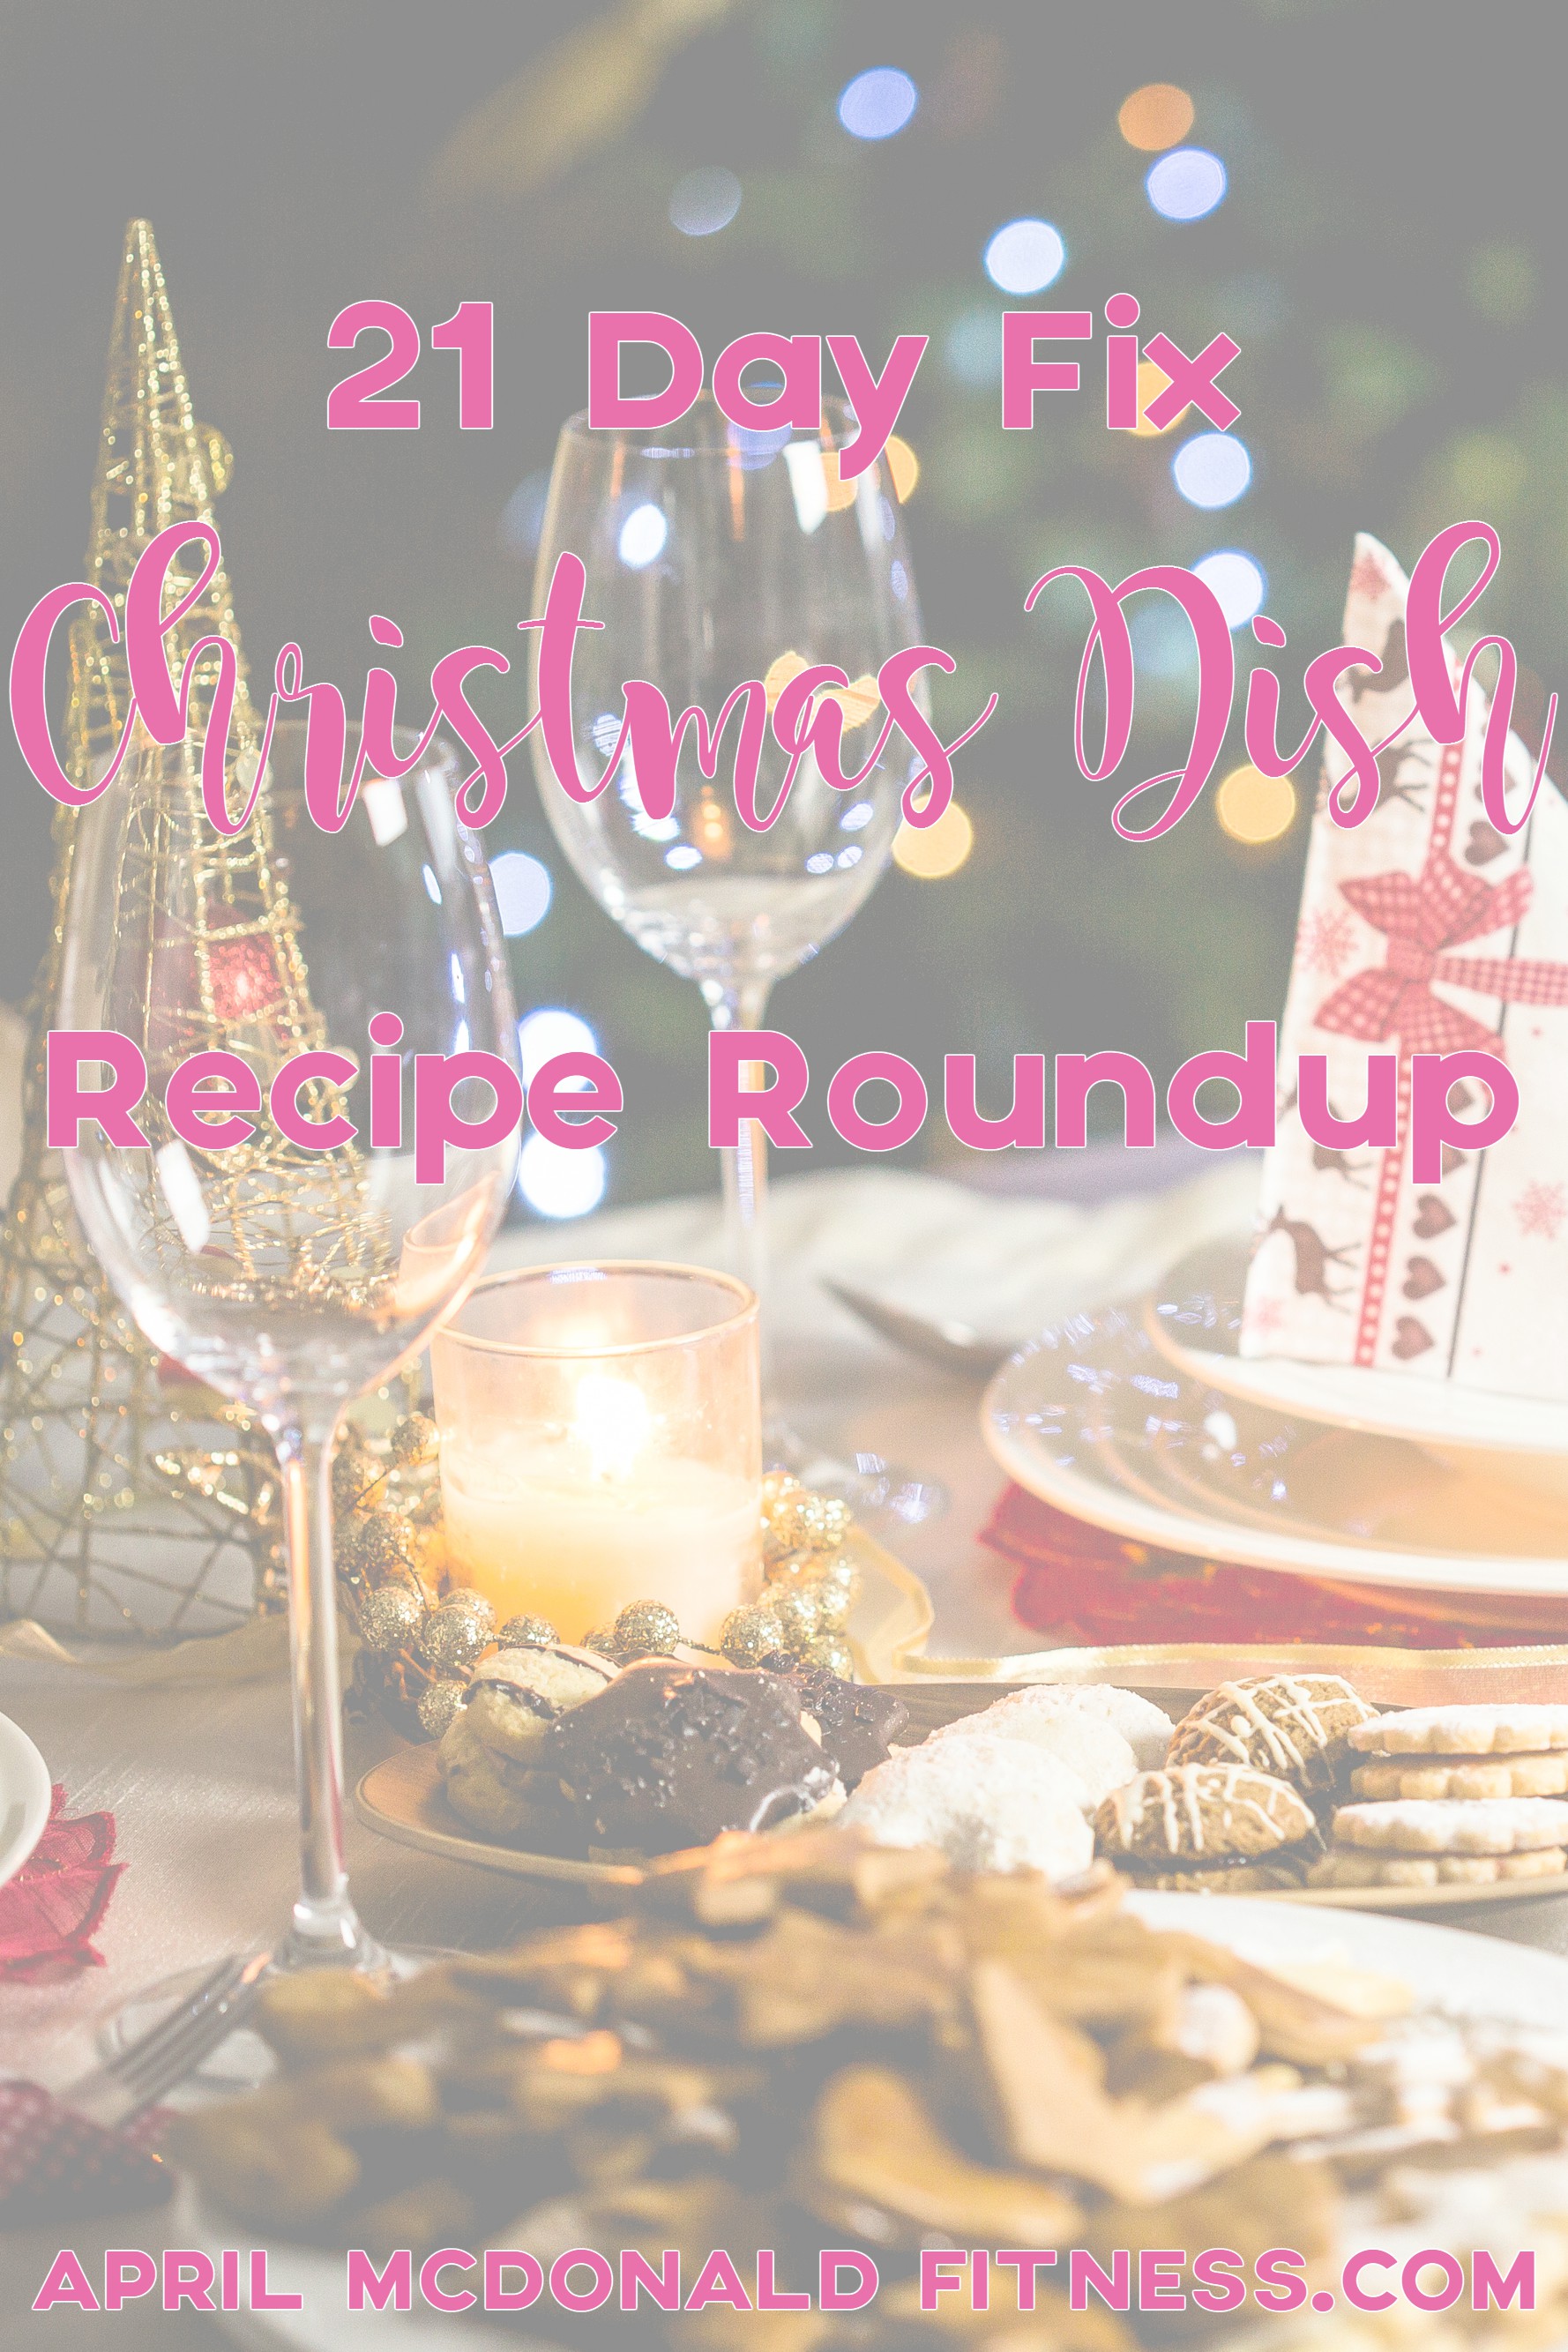 Enjoy Christmas morning and Christmas dinner with these 21 Day Fix approved recipes!